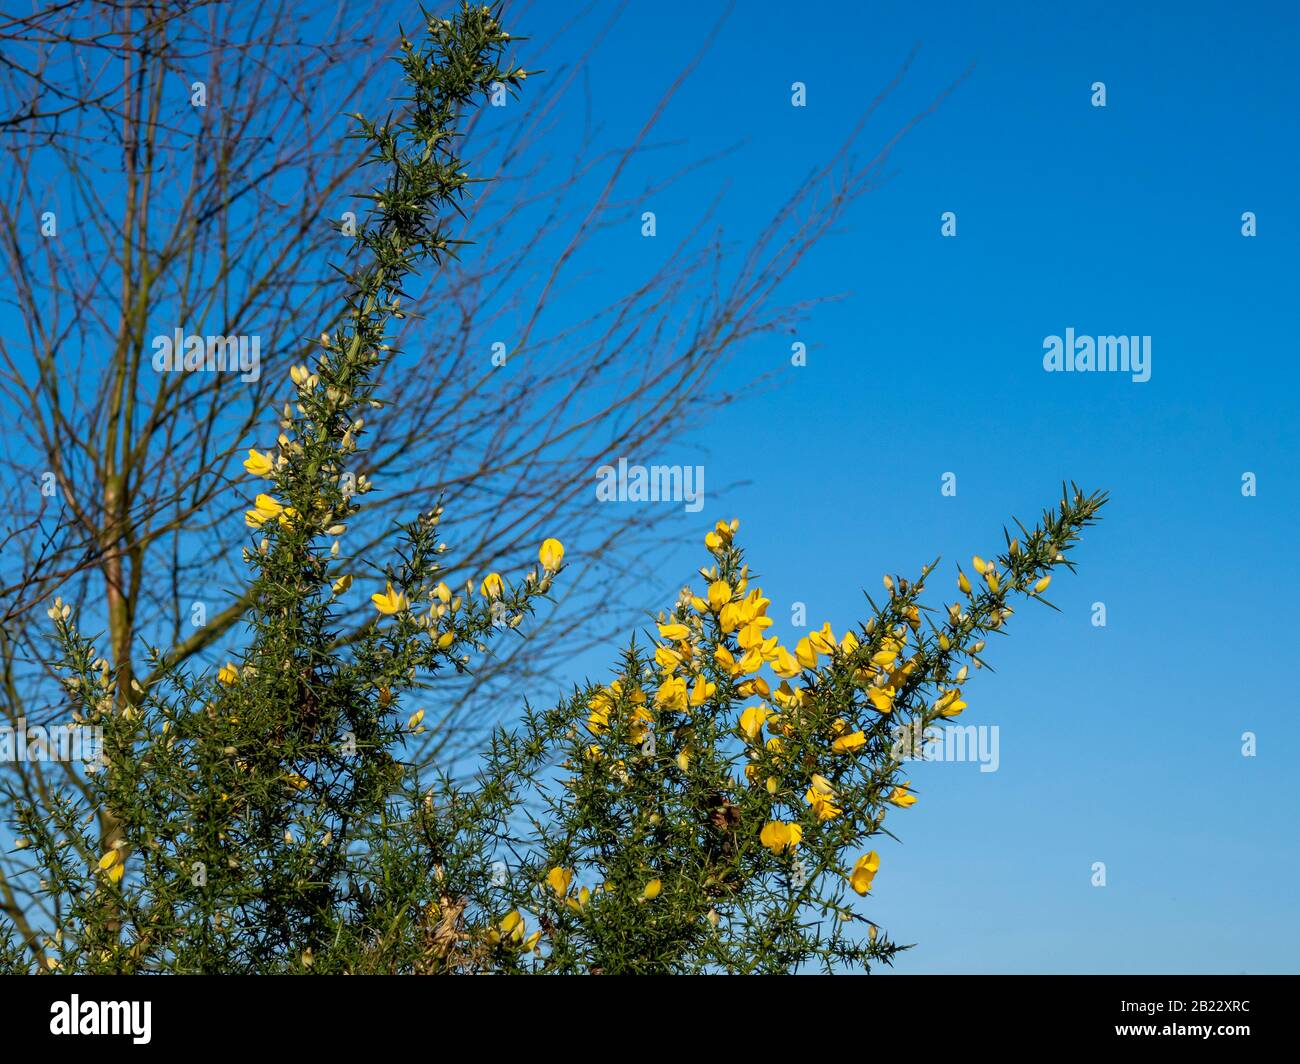 Yellow gorse flowers in winter in North Yorkshire, England, against a clear blue sky Stock Photo